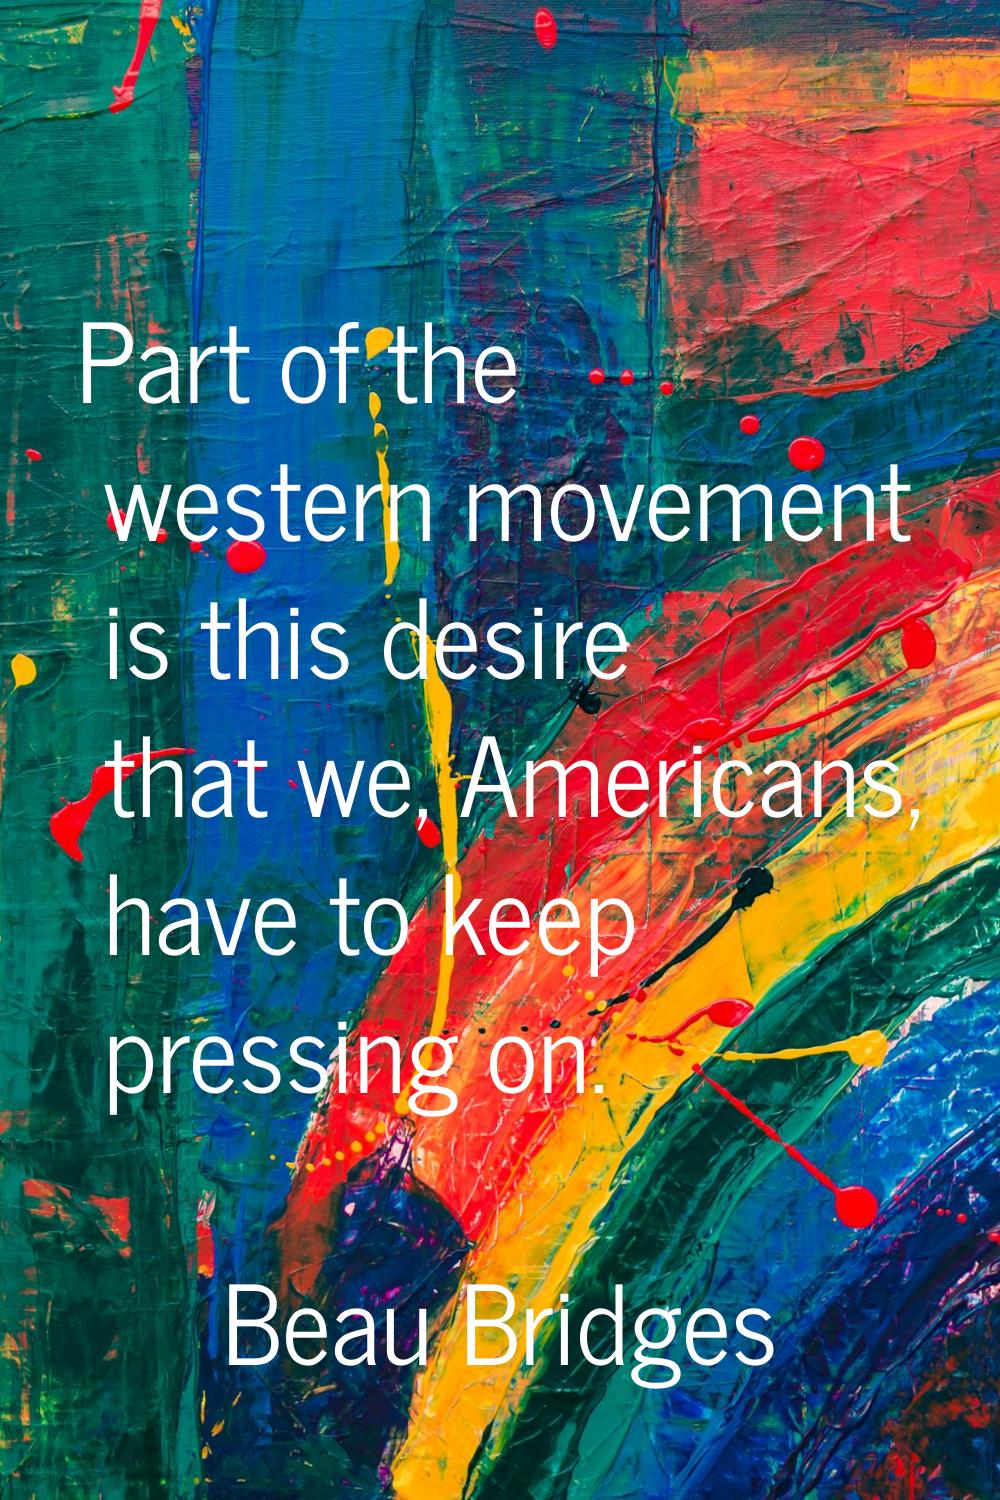 Part of the western movement is this desire that we, Americans, have to keep pressing on.